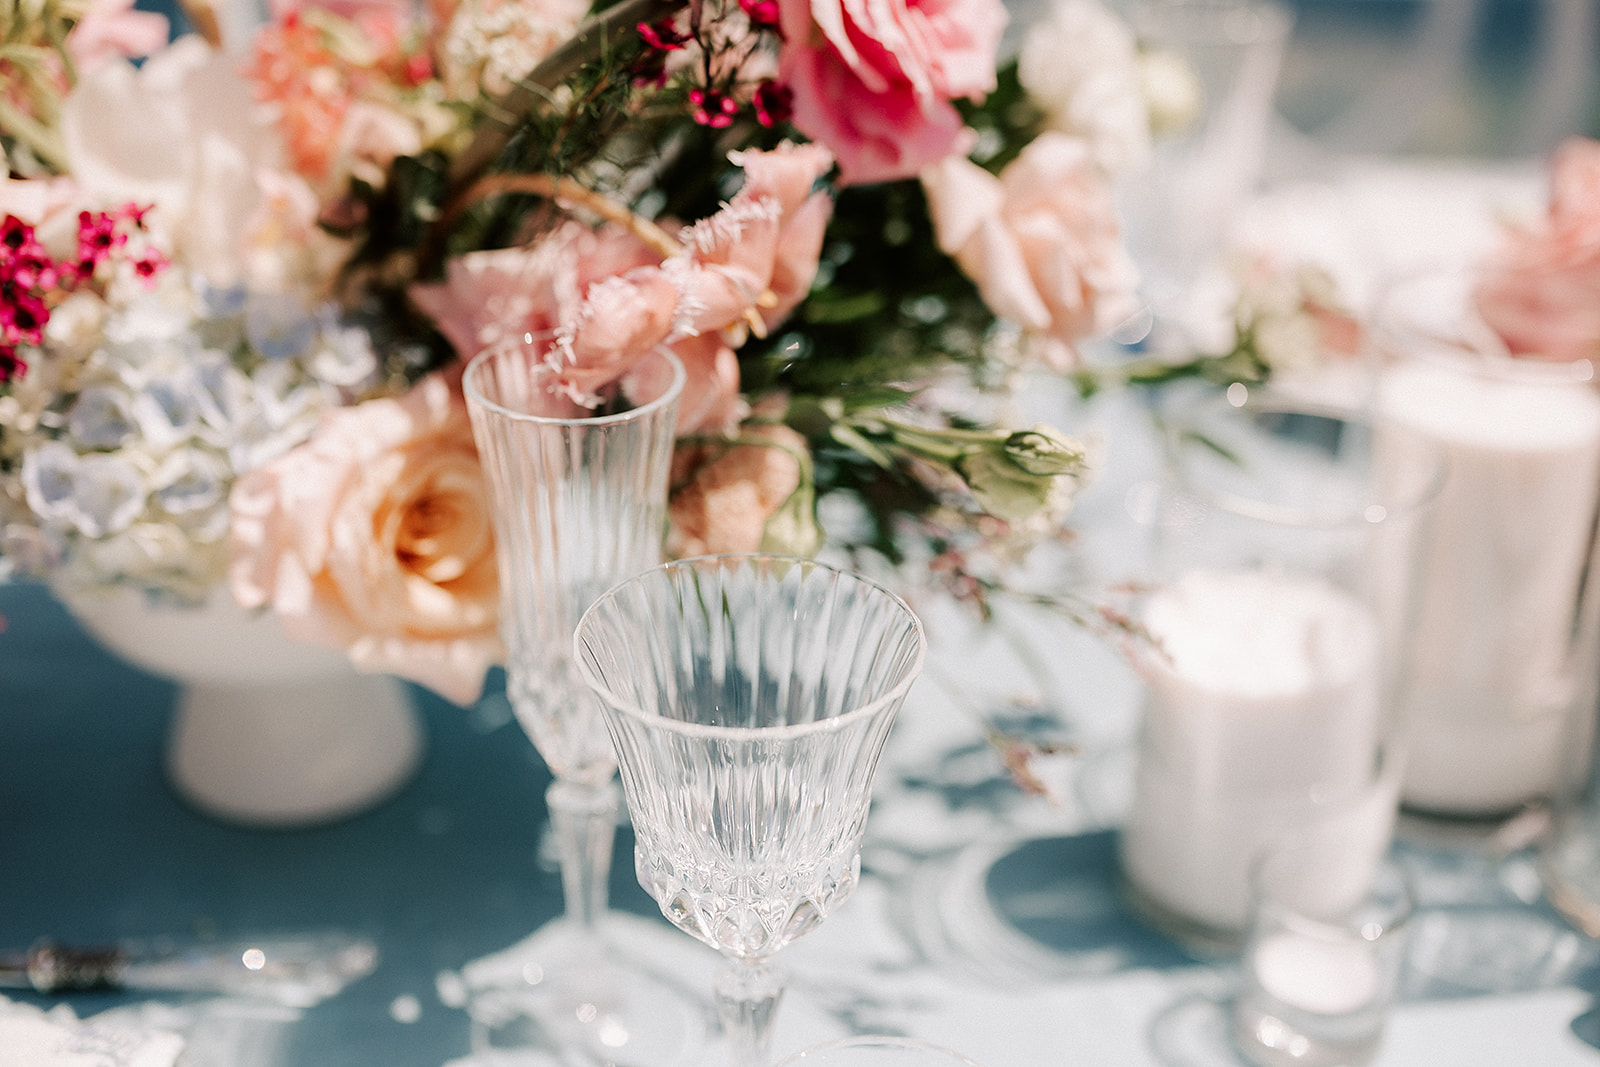 luxury wedding table settings, including crystal glassware and pink and white flowers